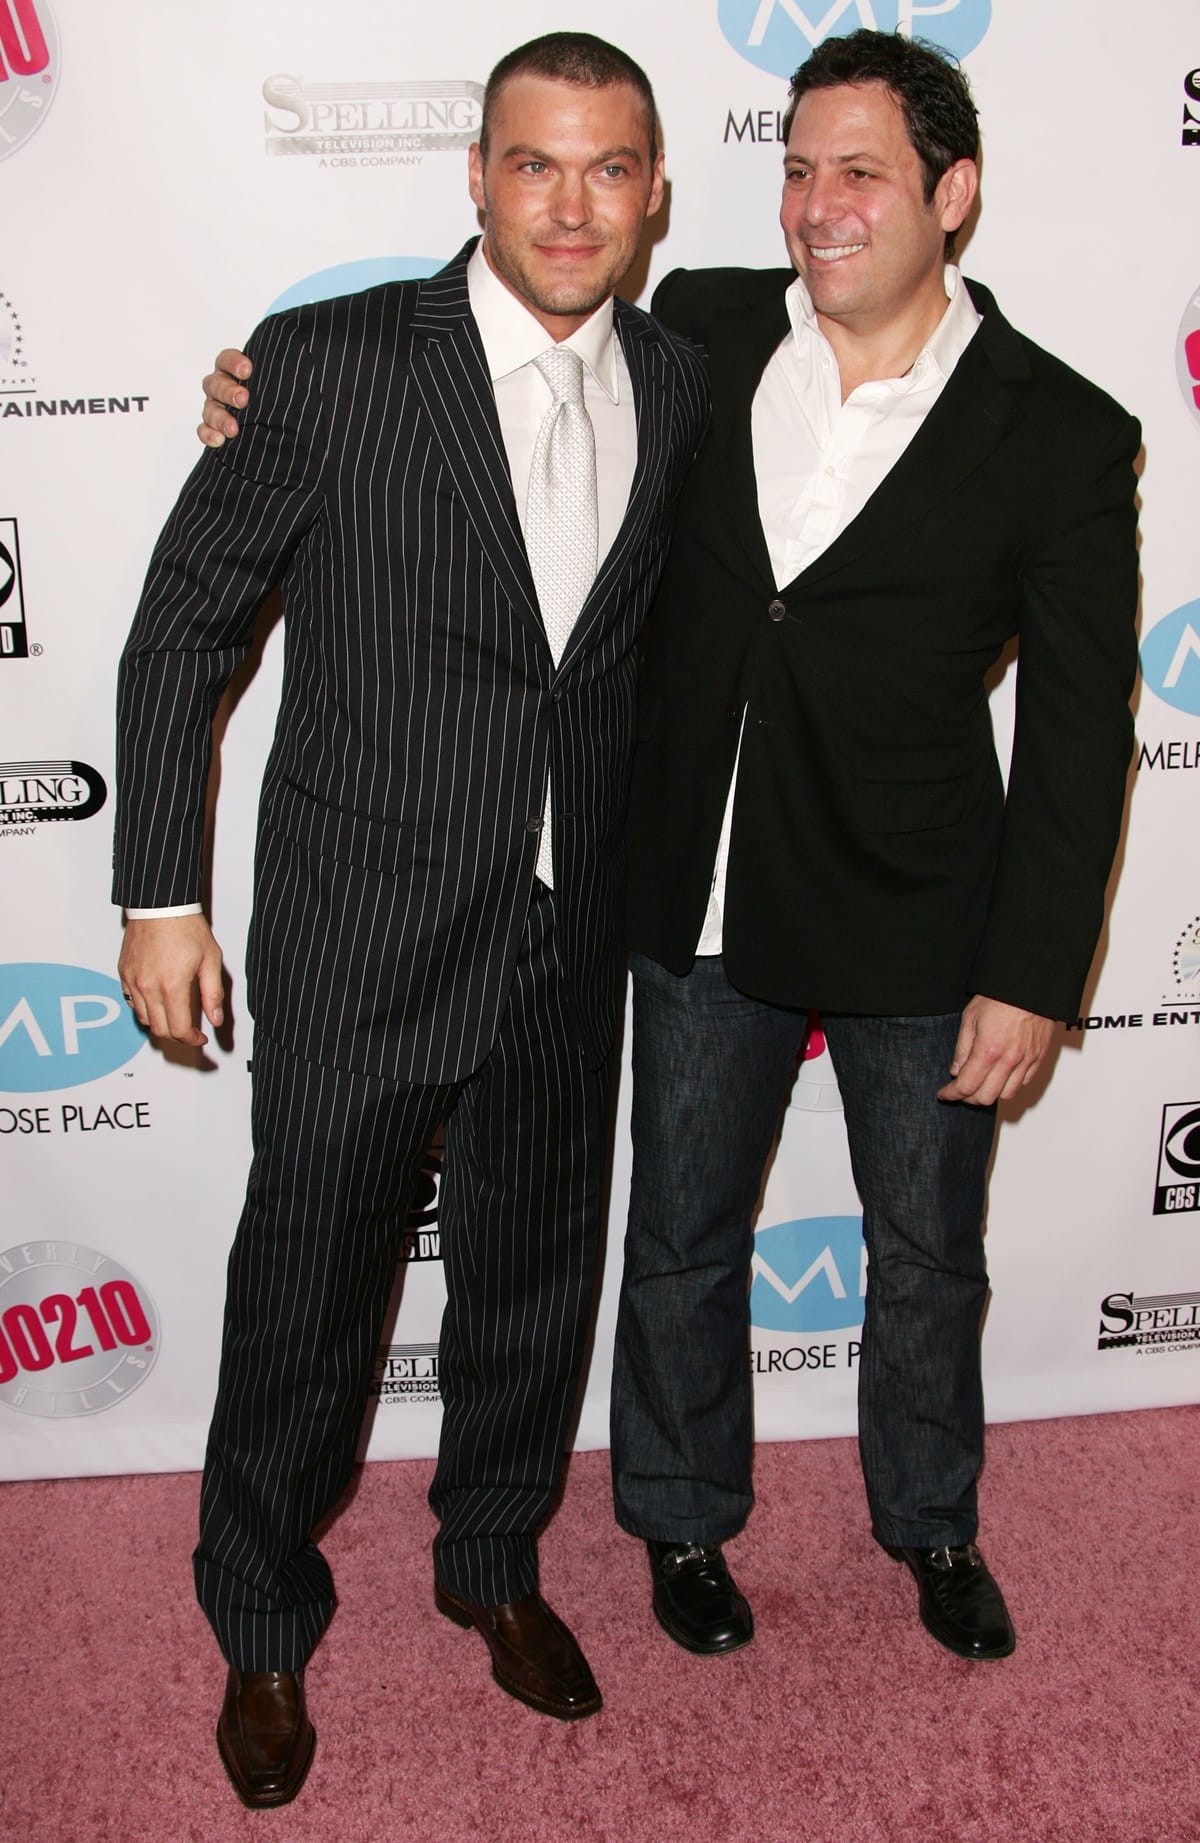 Actor Brian Austin Green (left) and producer Darren Star arrive at the "Beverly Hills, 90210 The Complete First Season" DVD Party